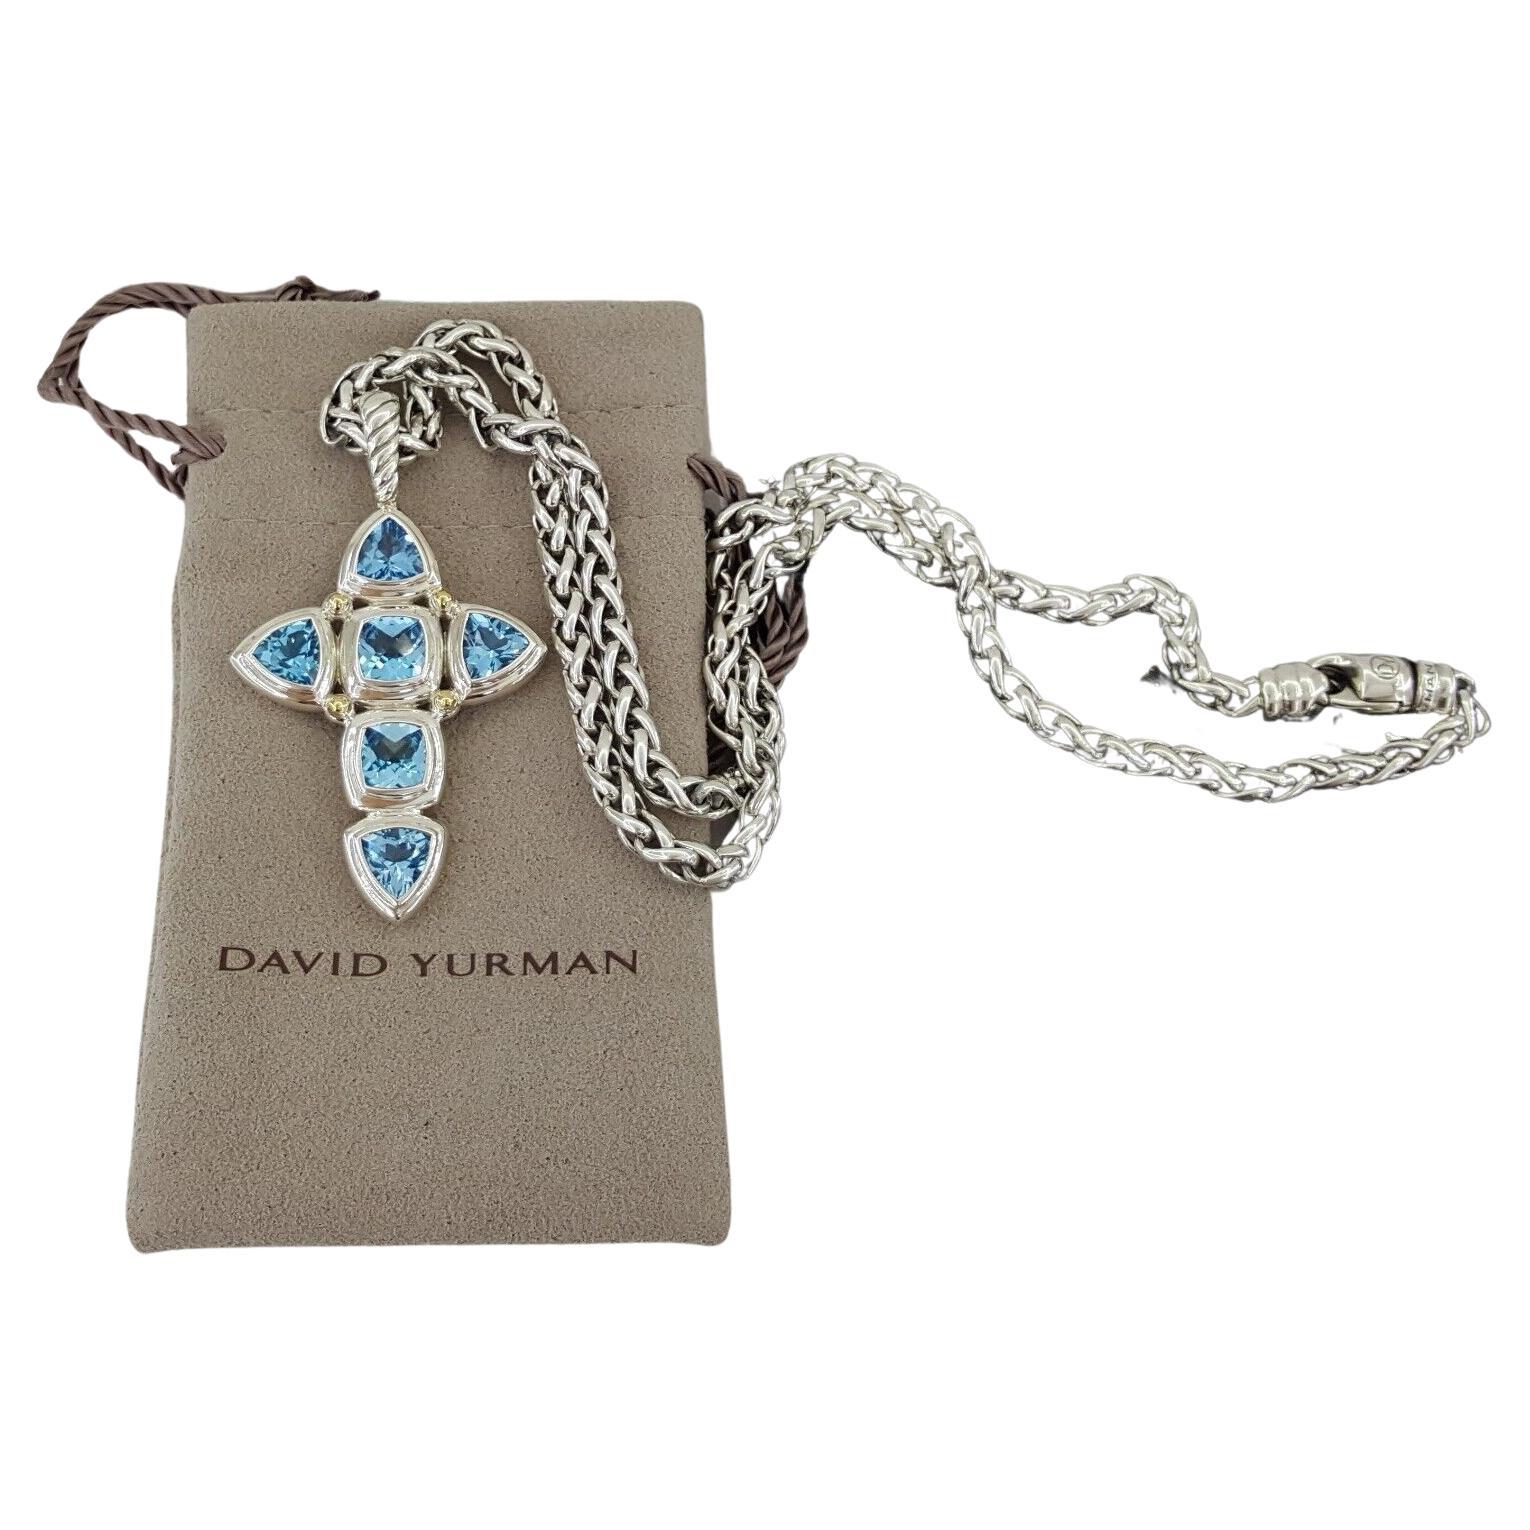 David Yurman Renaissance Blue Topaz Silver Cross Cable Pendant Necklace 18 In New Condition For Sale In Rome, IT